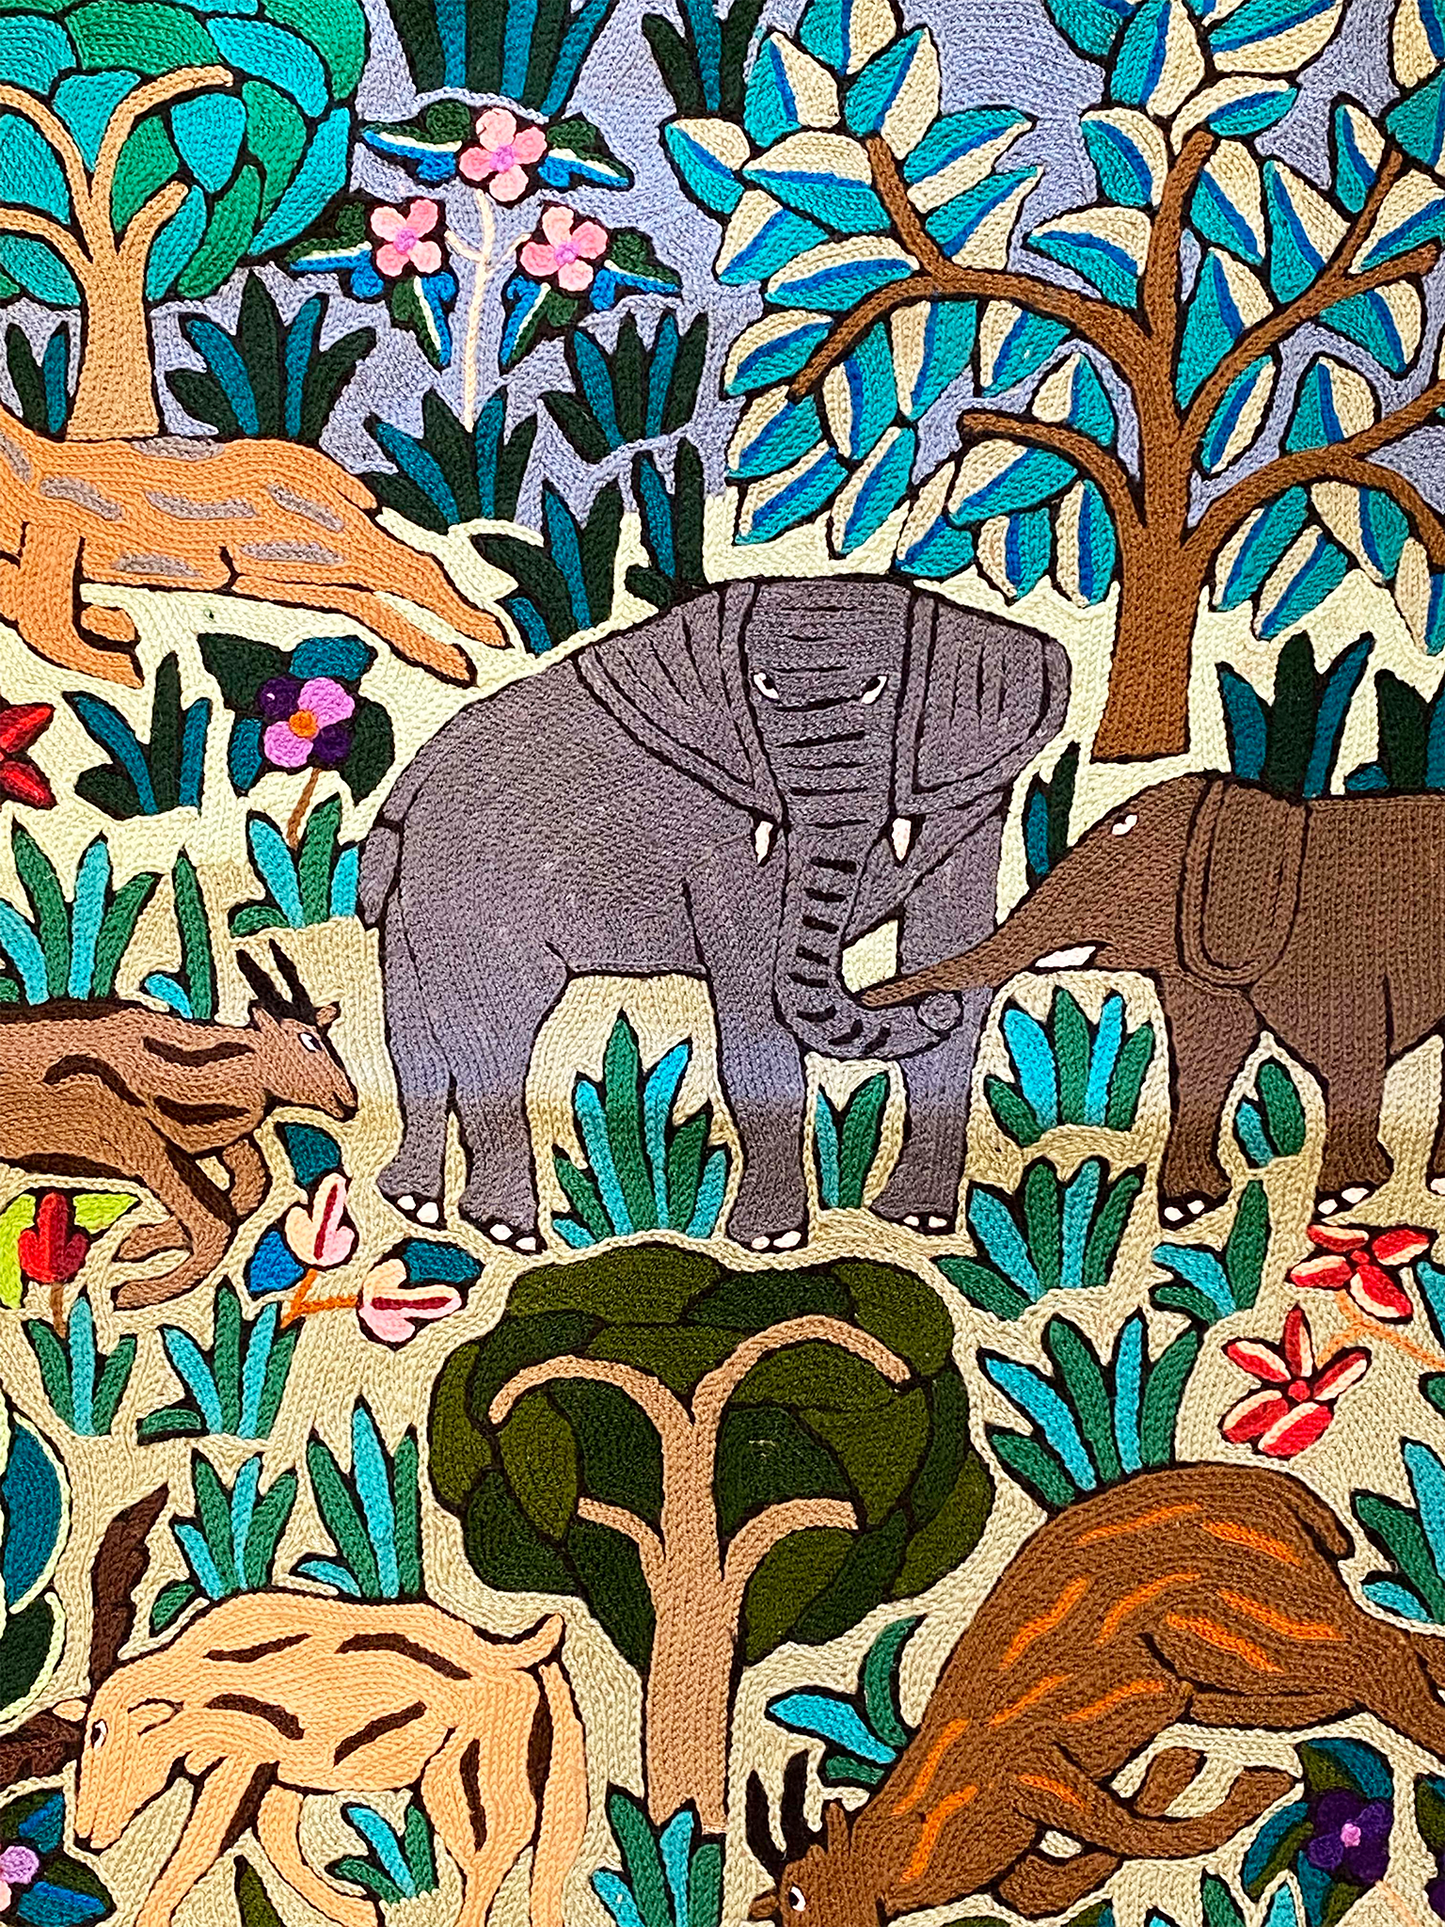 The Approaching Elephant Vintage Tapestry Wall Hanging